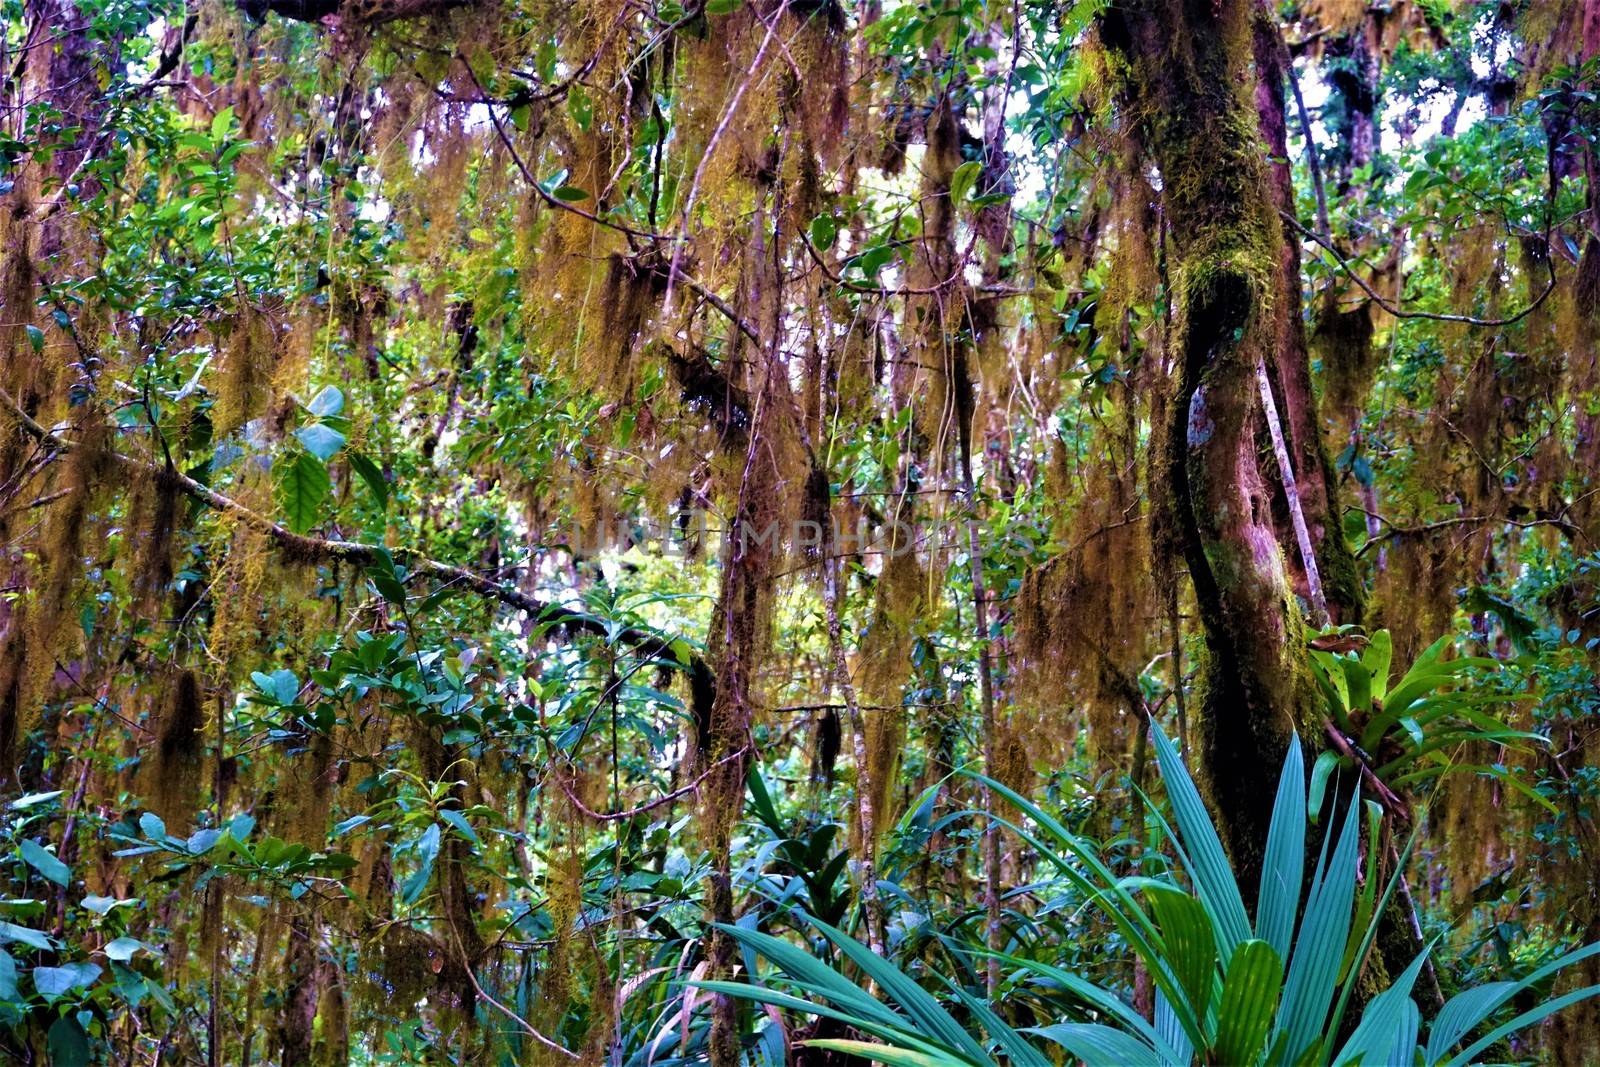 Tillandsia usneoides hanging from trees in the rain forest